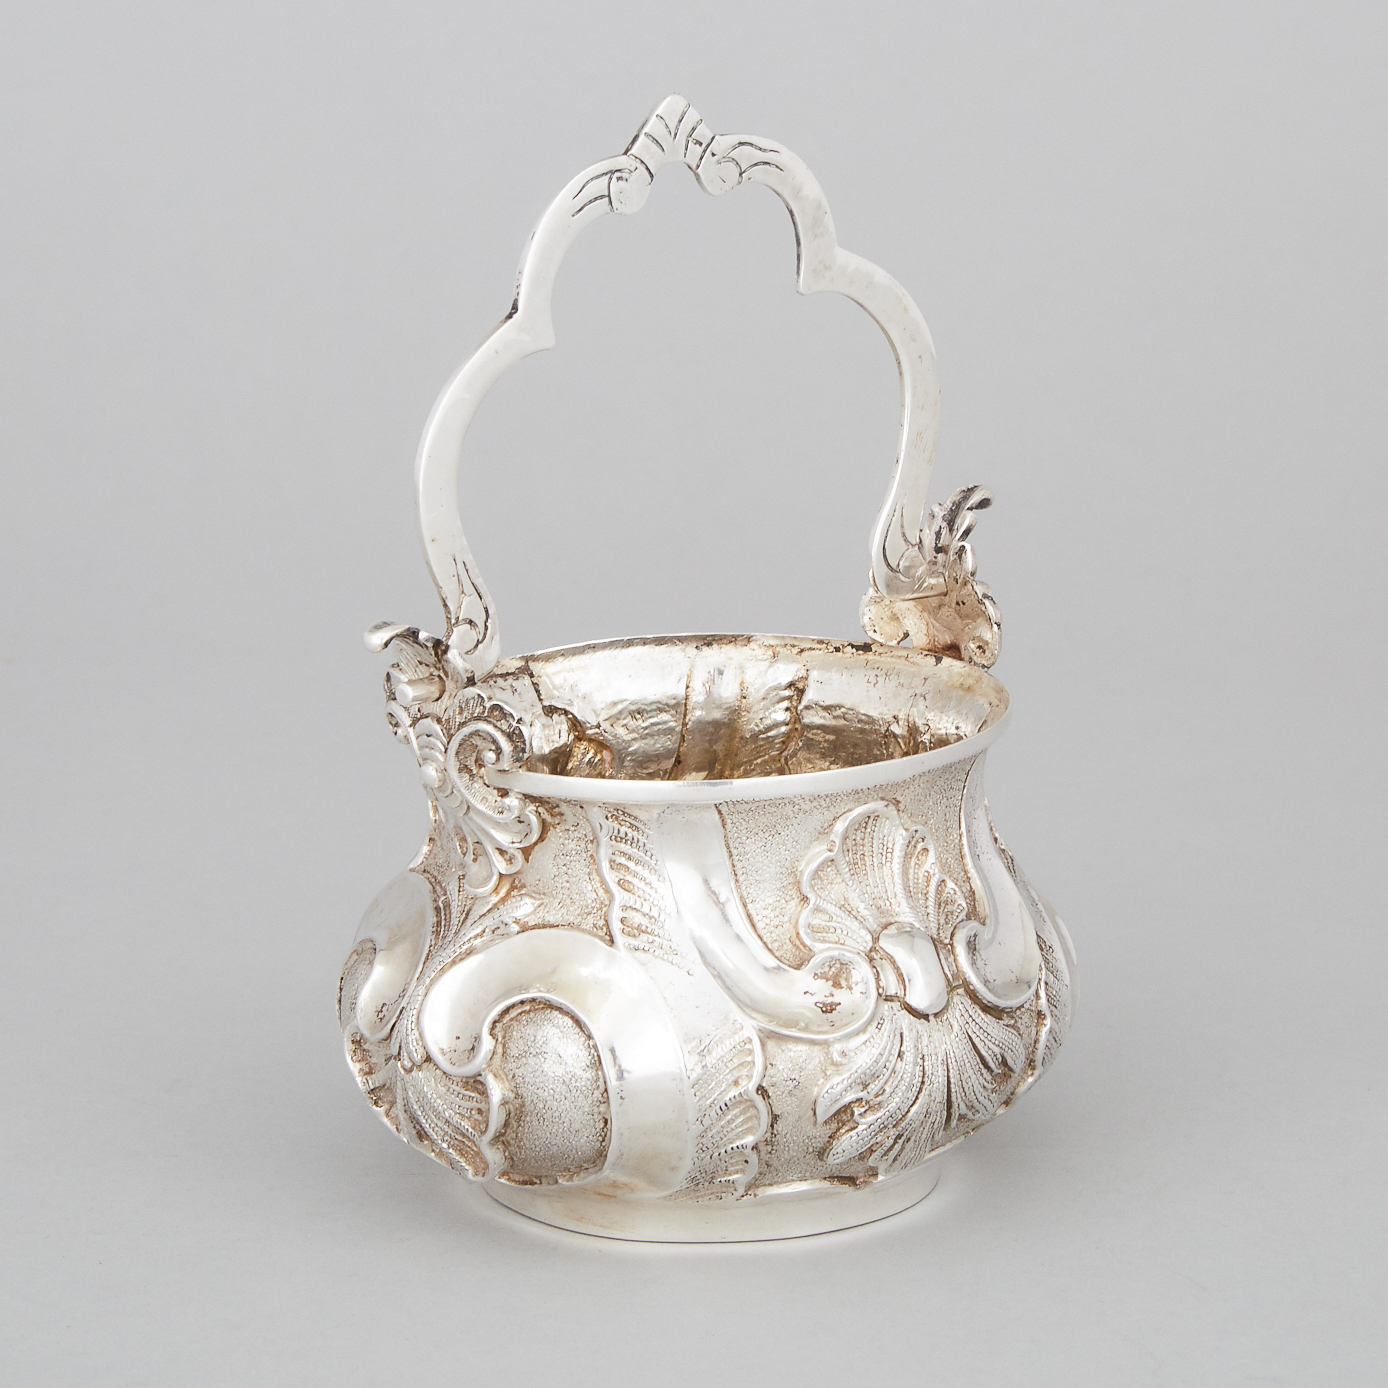 Continental Silver Situla, 19th century